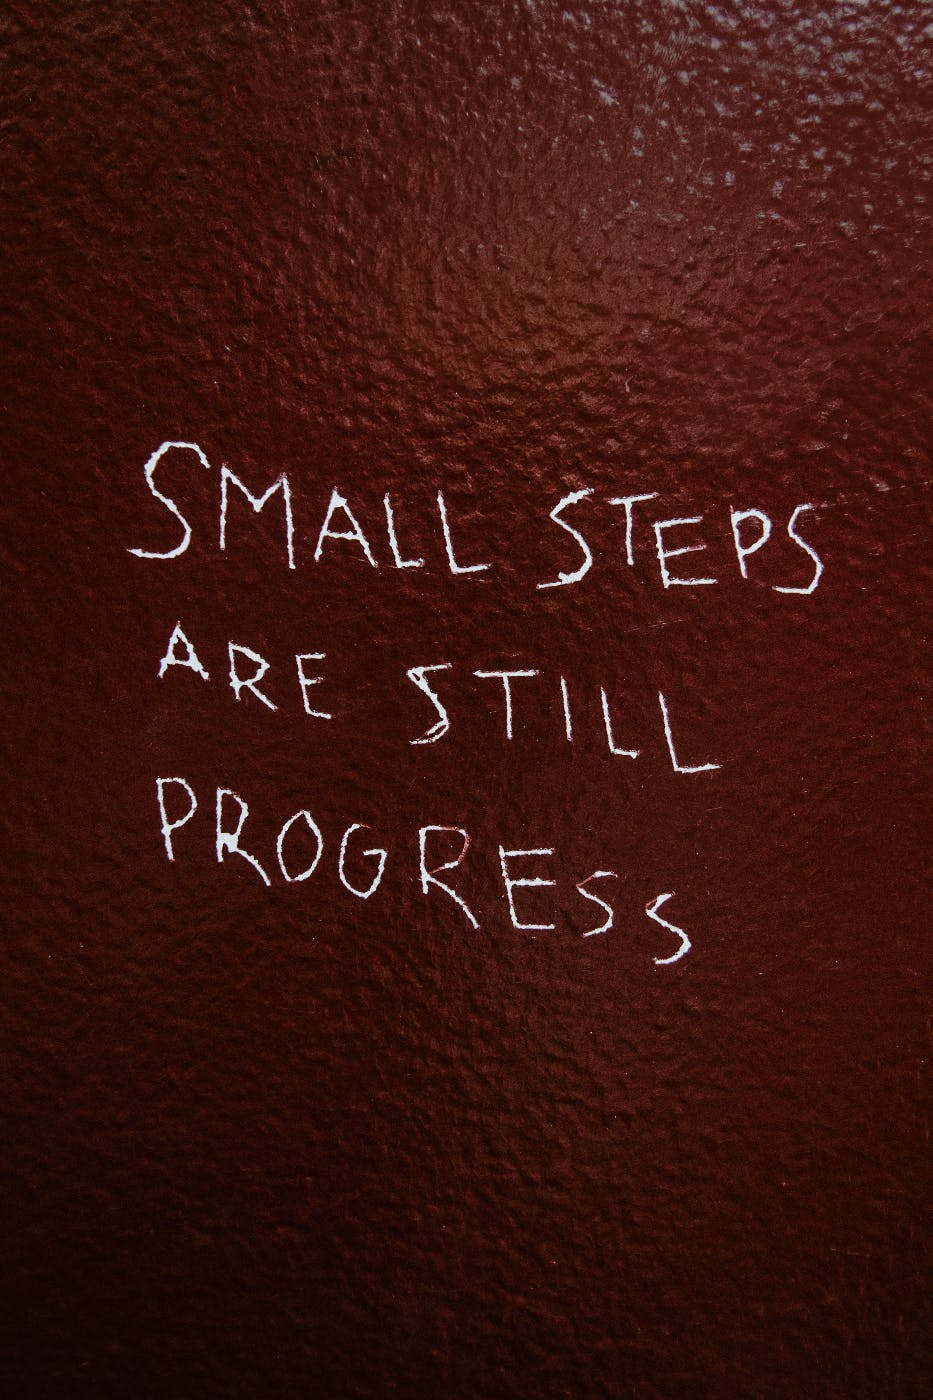 A wall with small steps are still progress scratched in it.